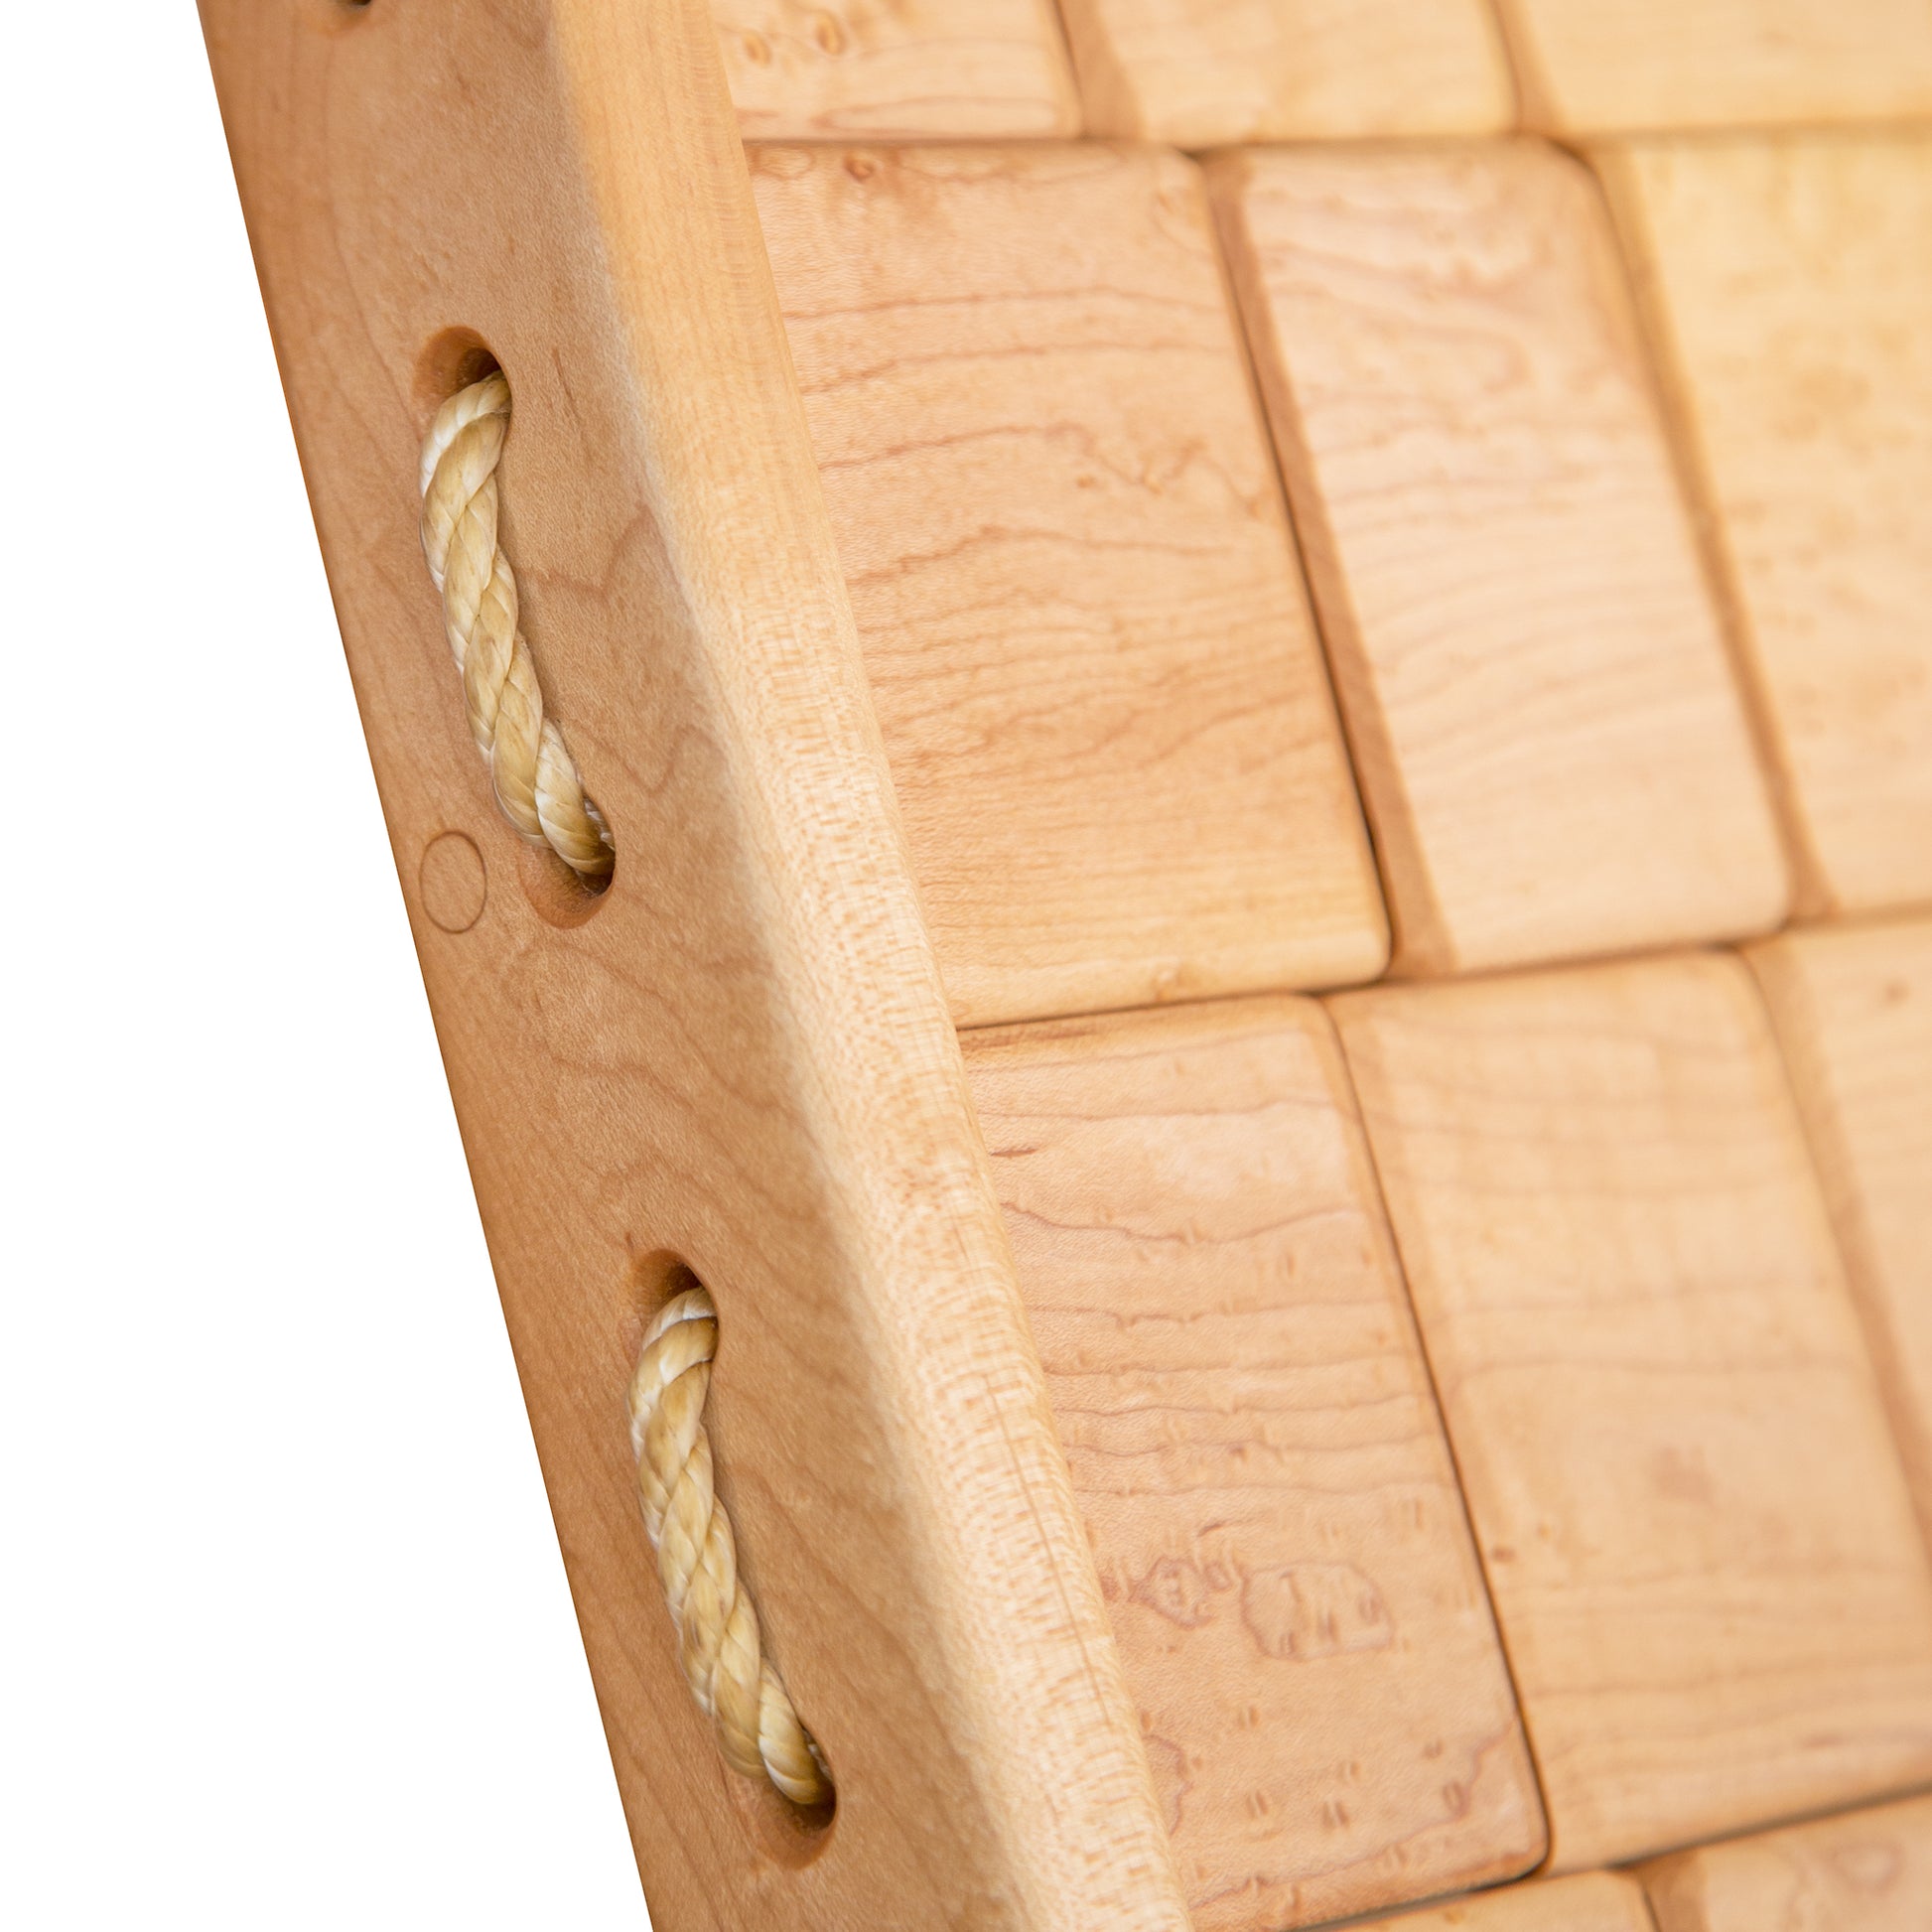 Close-up of a Vermont Folk Rocker Quilted Vermont Birdseye Maple Rocking Chair game board with rope handles inserted into drilled holes on the sides, showing detailed wood grain and texture.